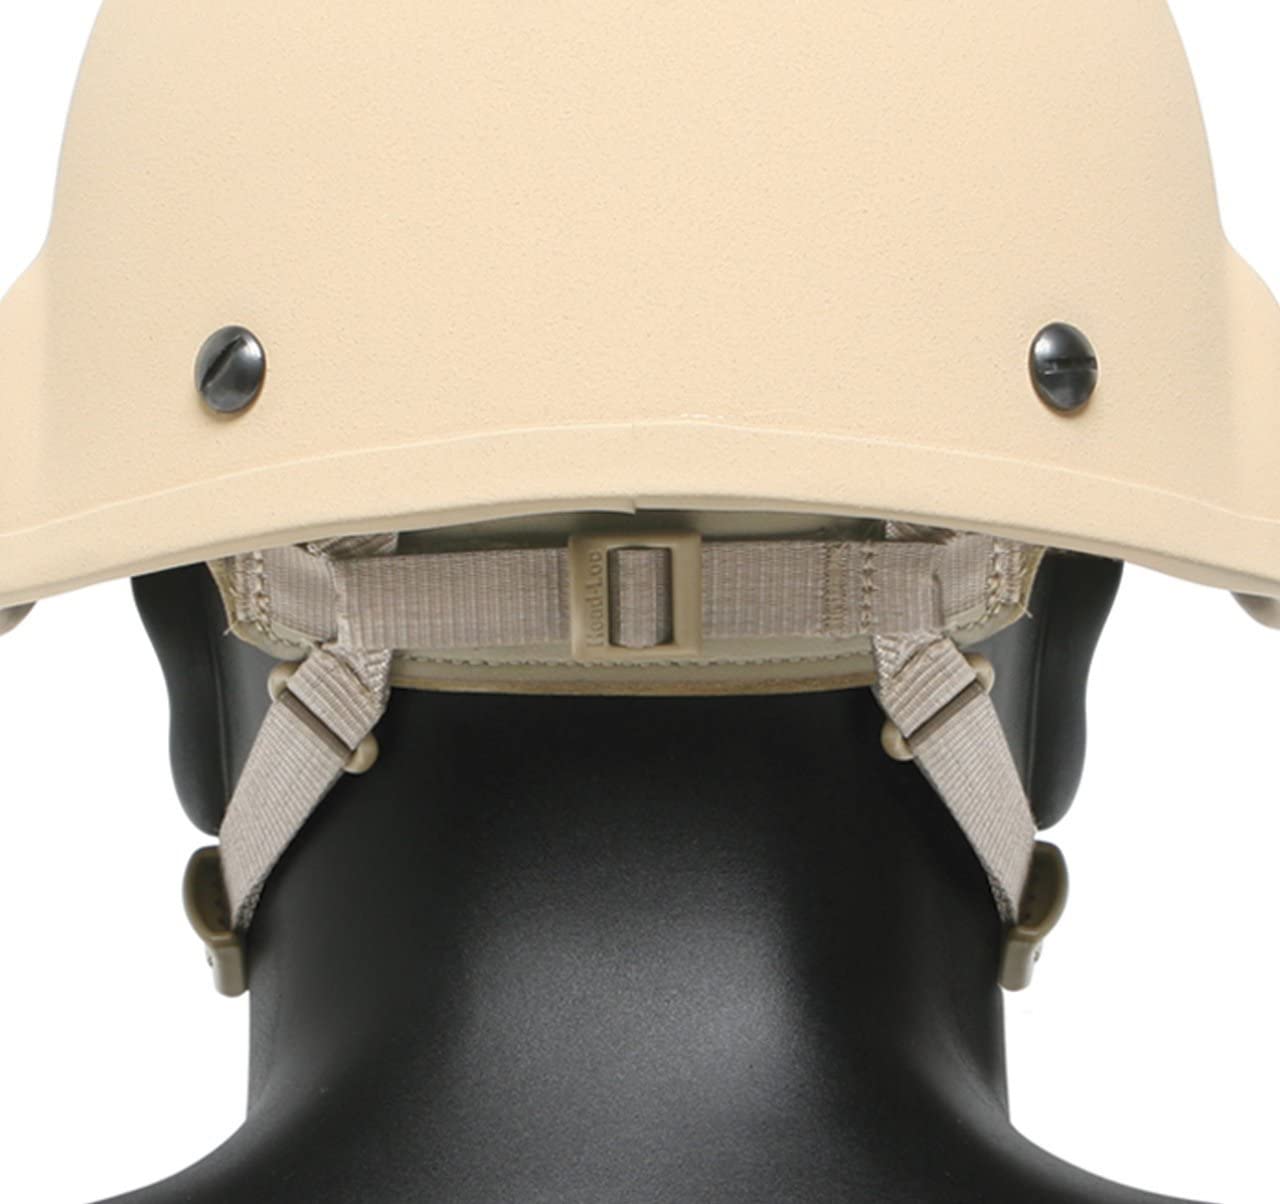 5-Point Replacement Chin Strap and Suspension System for Tactical Helmets